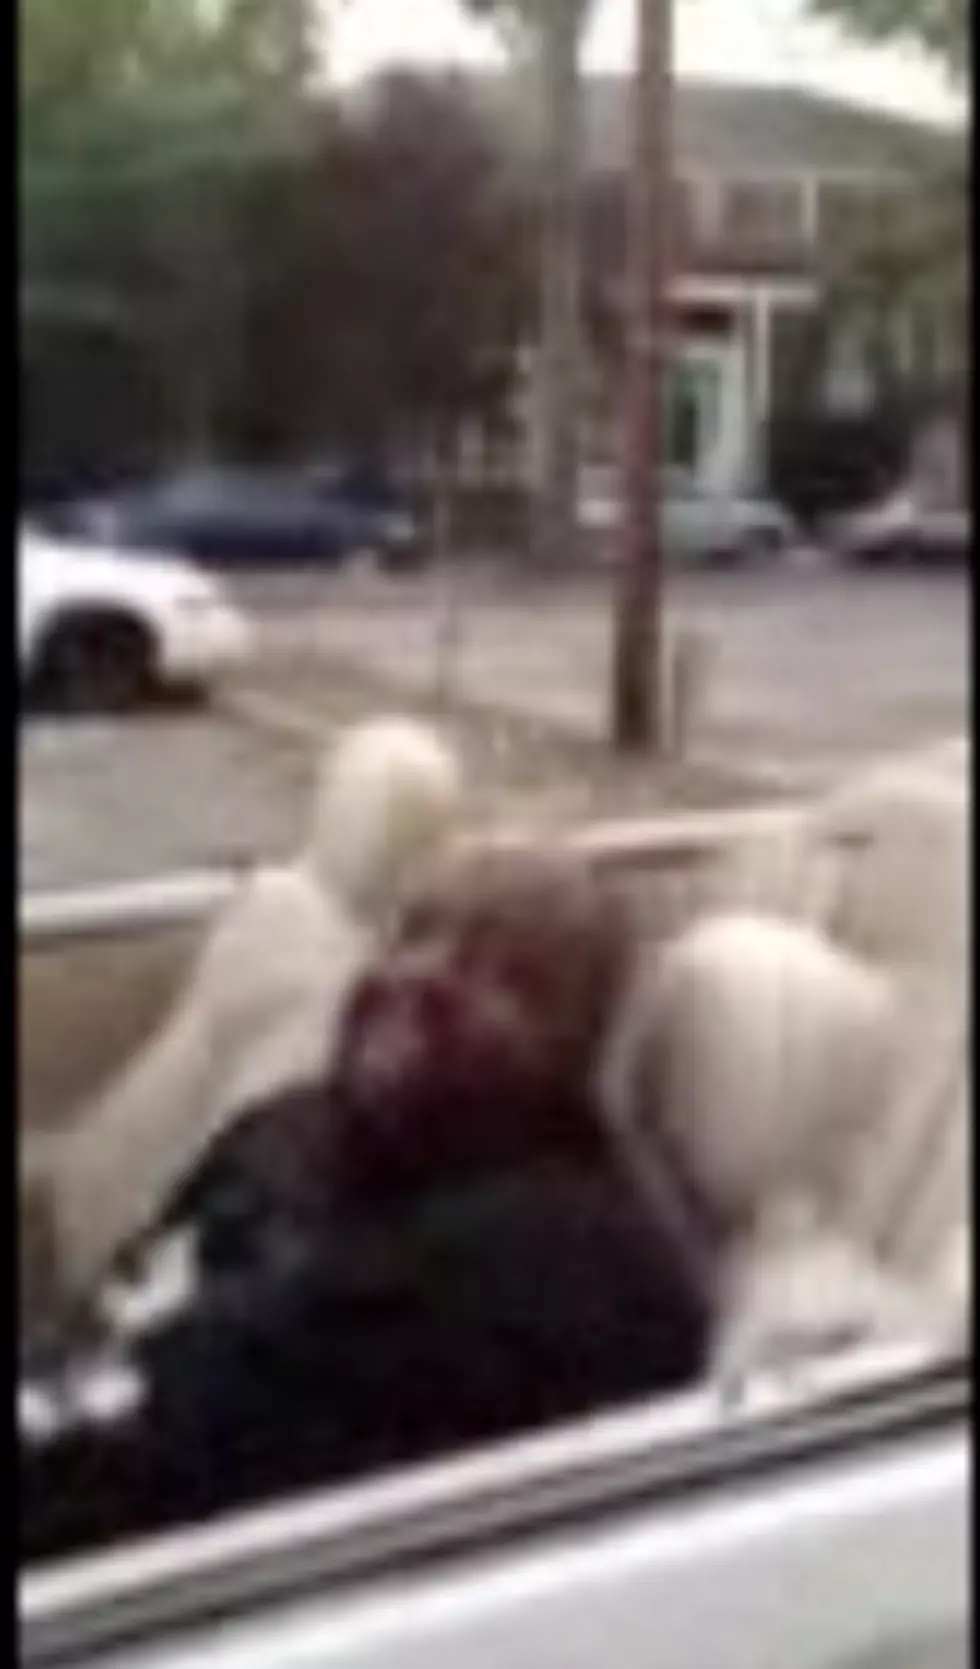 Irvington Cops Make Gangsta Video – Should They be Disciplined? [POLL]